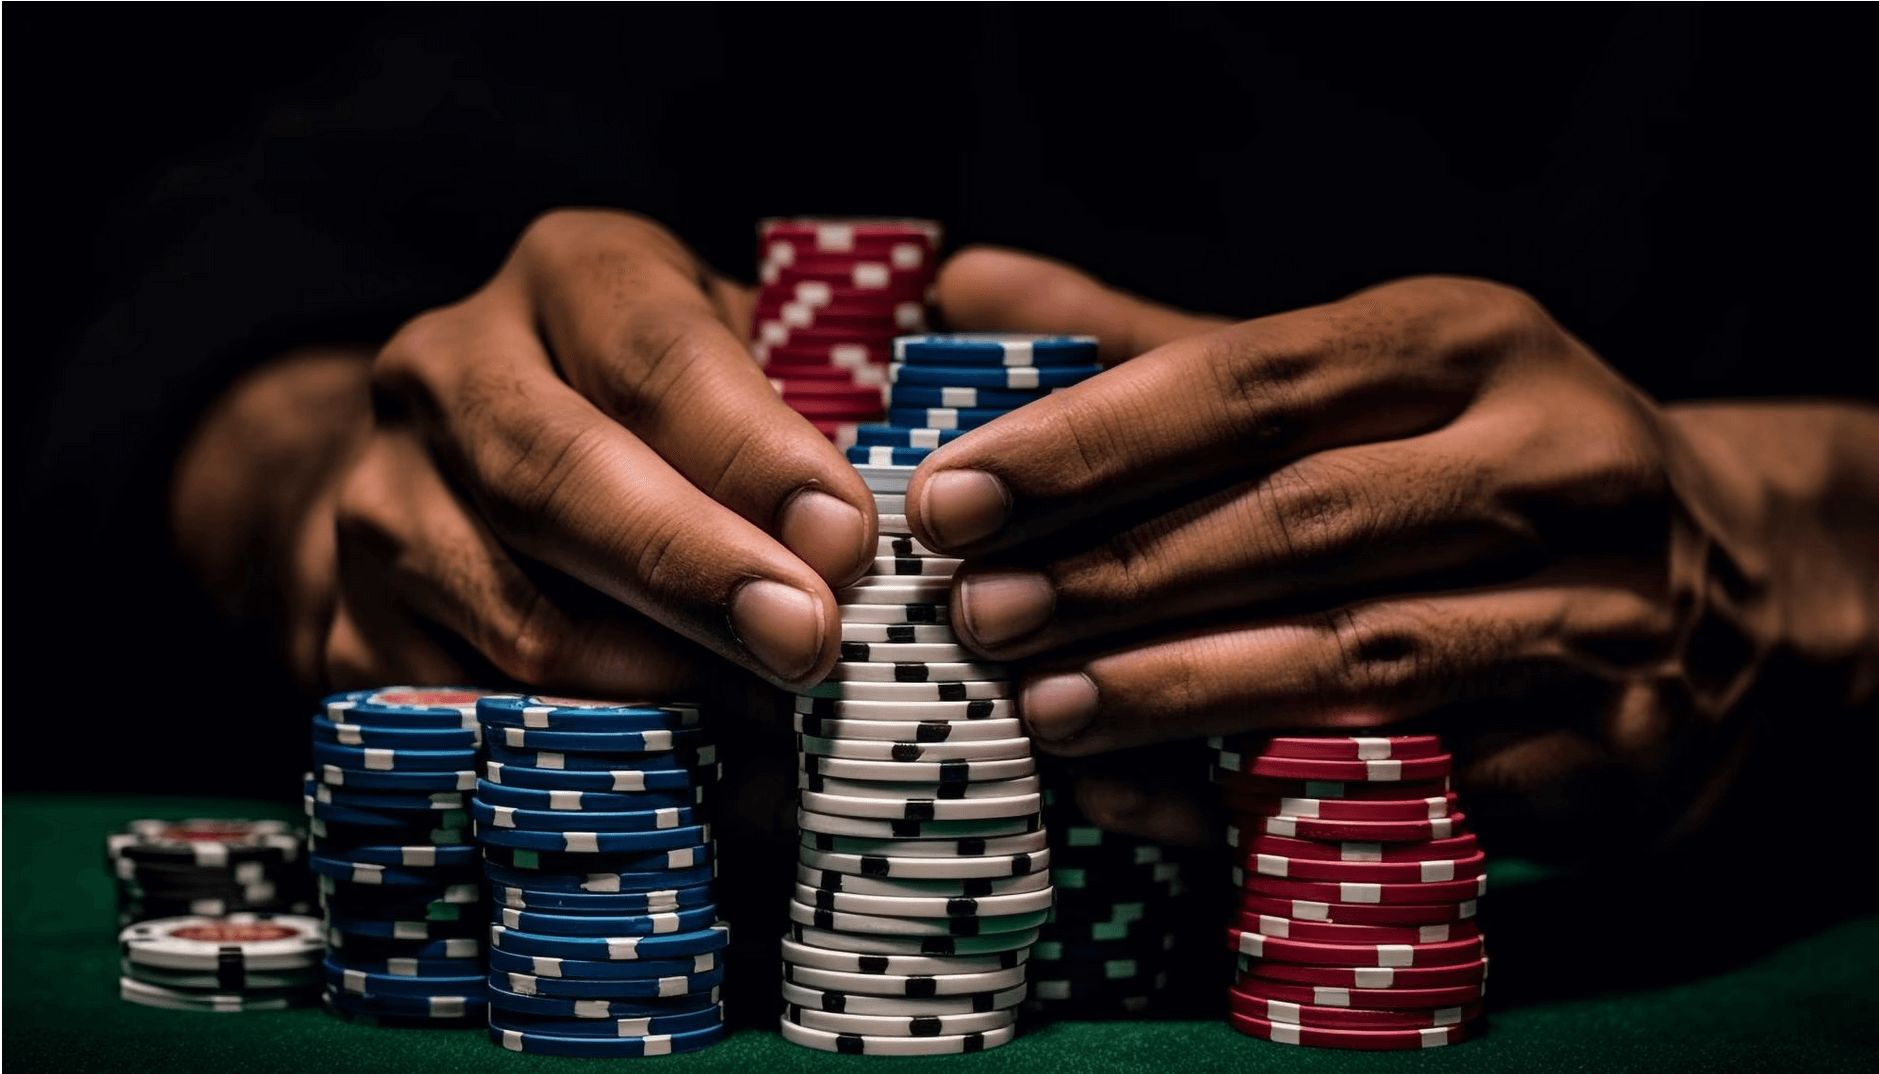 10 Tips for Creating Content for Gambling & Casino Affiliate Sites - content for gambling and casino